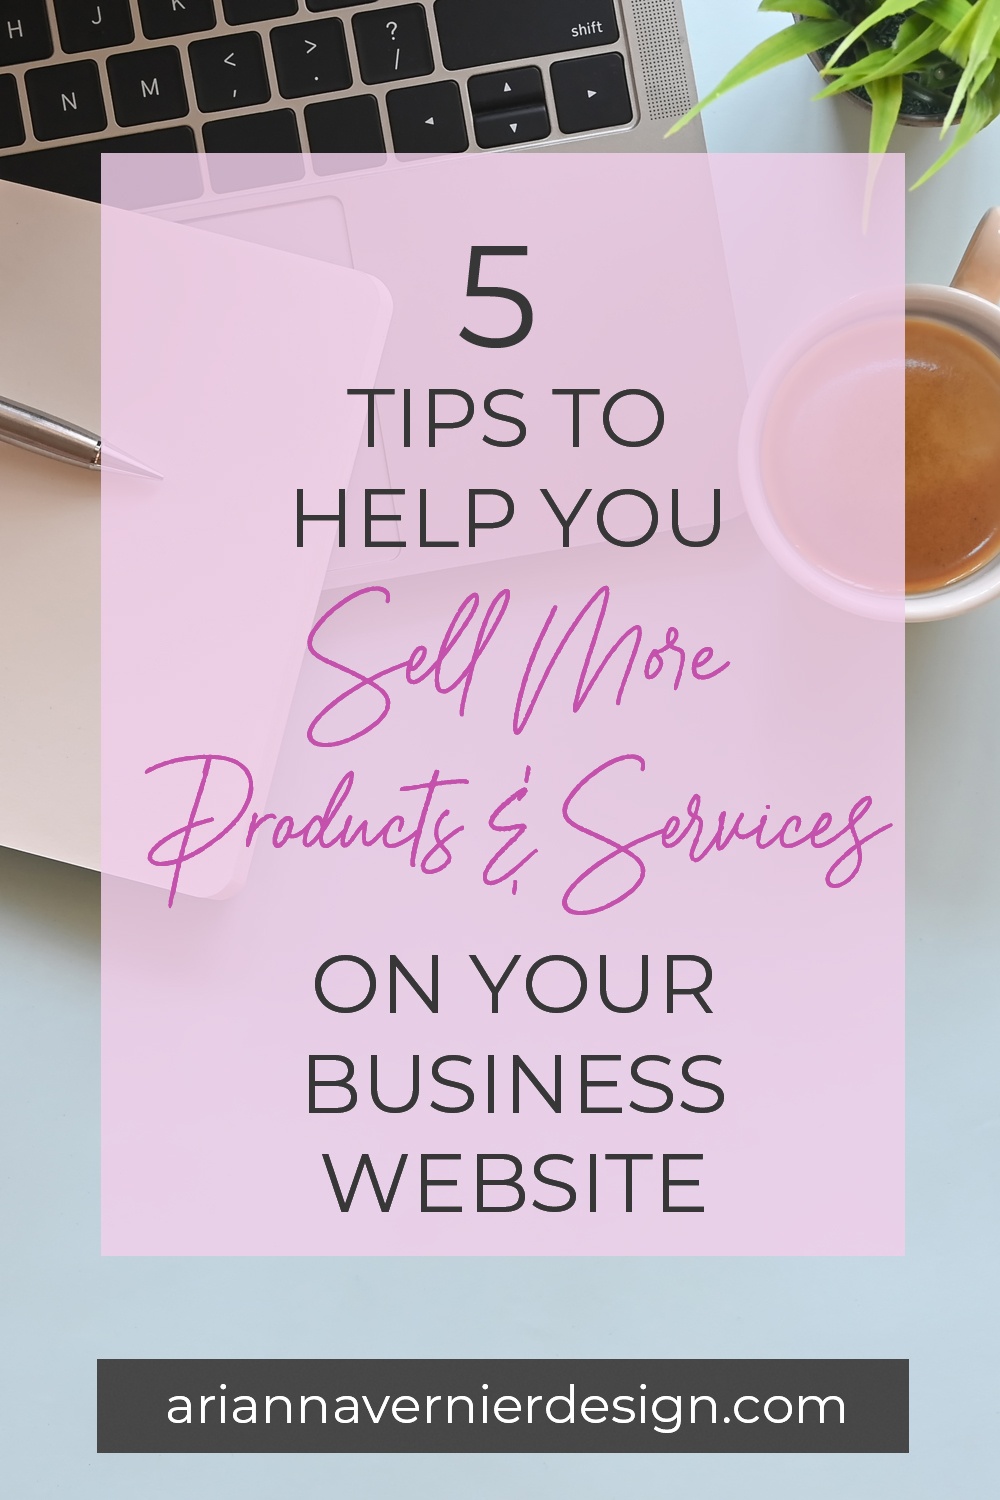 Pinterest pin with a coffee and notebook in the background, with a light purple rectangle over top, and the title "5 Tips to Help You Sell More Products and Services on Your Business Website"